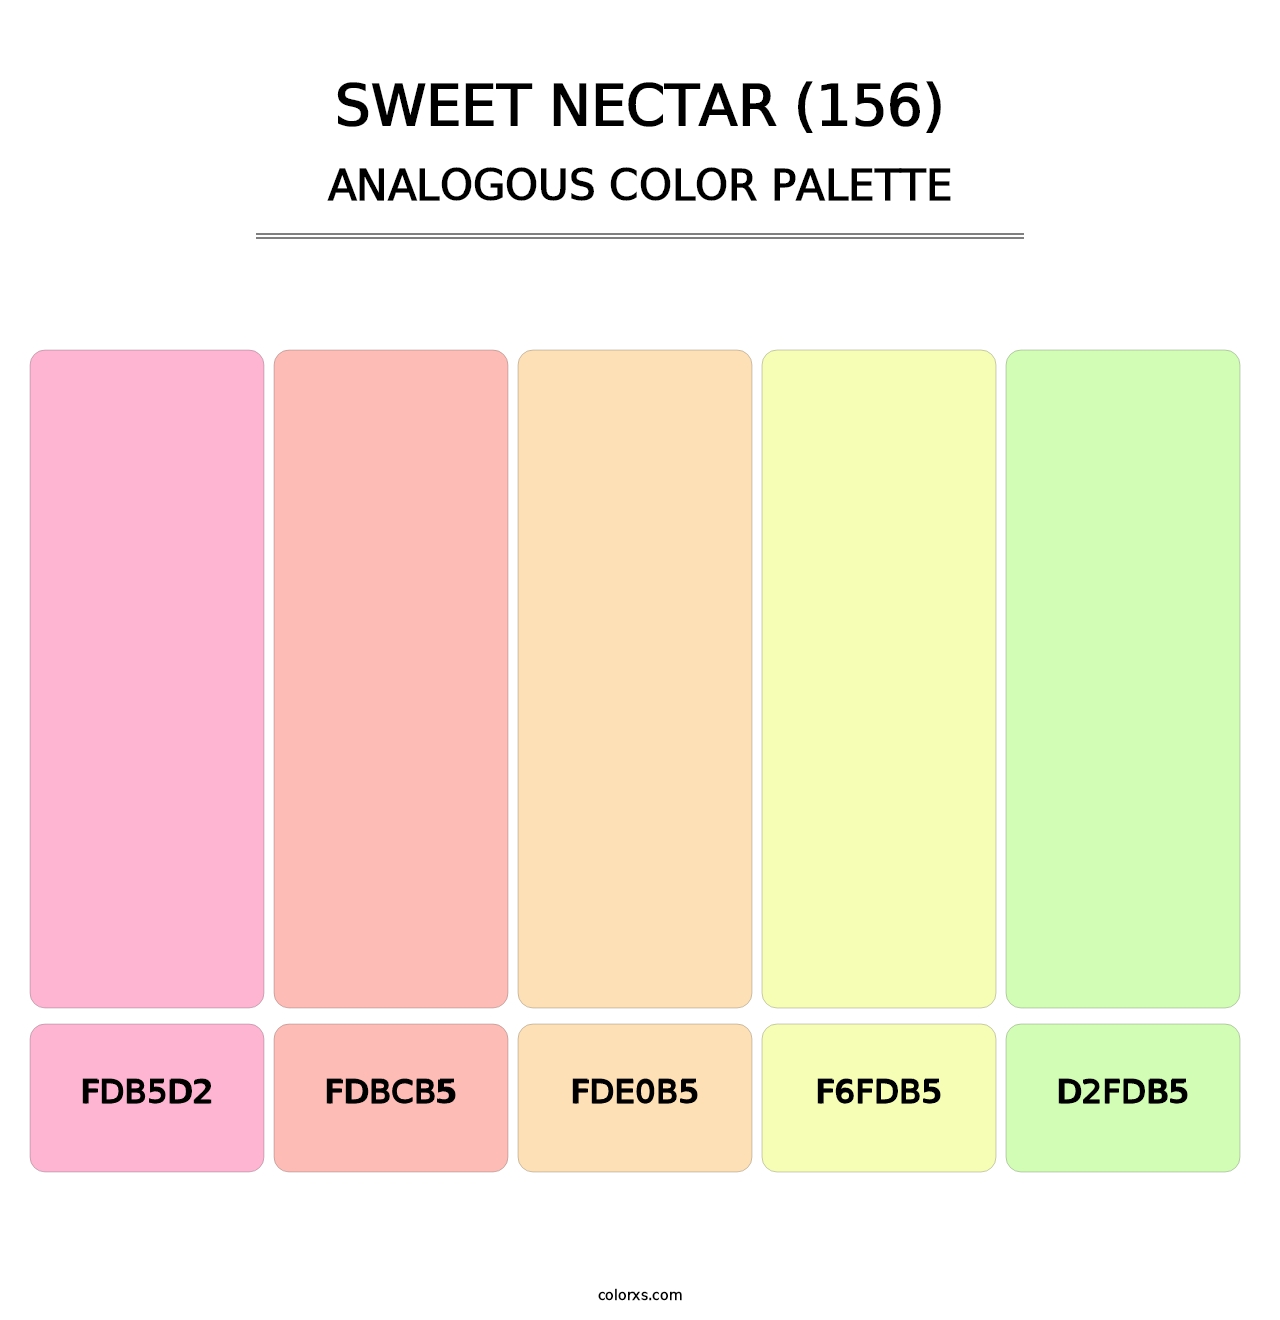 Sweet Nectar (156) - Analogous Color Palette